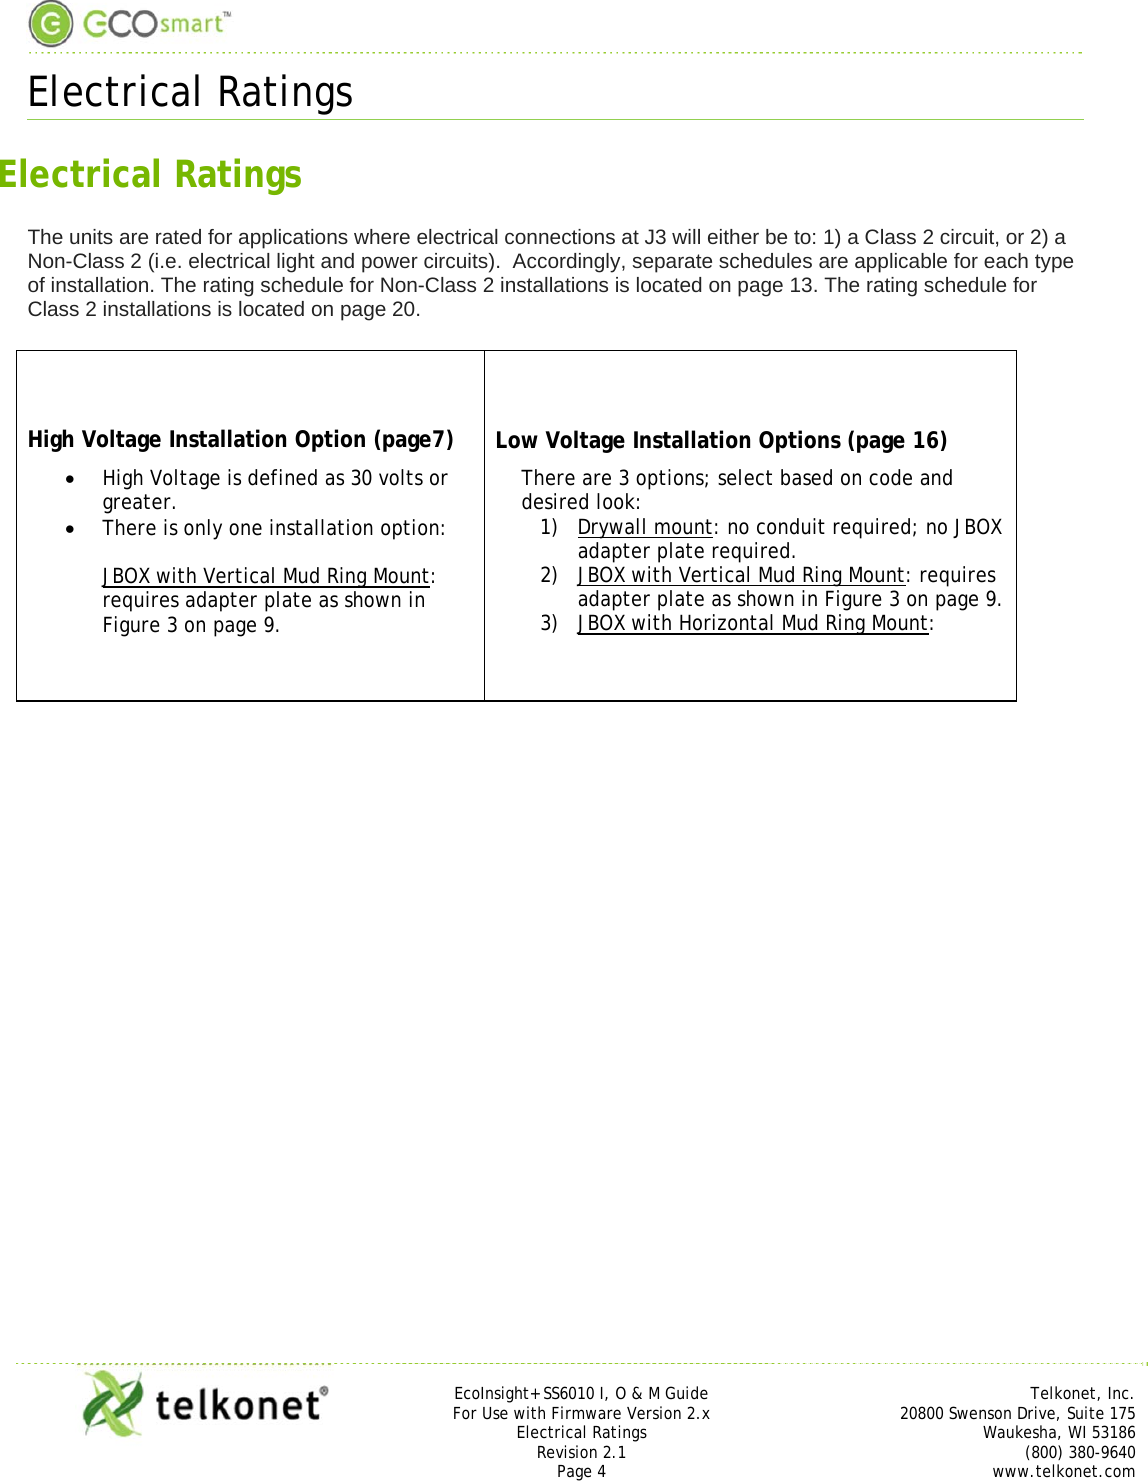  Electrical Ratings     EcoInsight+ SS6010 I, O &amp; M Guide Telkonet, Inc. For Use with Firmware Version 2.x 20800 Swenson Drive, Suite 175 Electrical Ratings Waukesha, WI 53186 Revision 2.1 (800) 380-9640 Page 4 www.telkonet.com  Electrical Ratings The units are rated for applications where electrical connections at J3 will either be to: 1) a Class 2 circuit, or 2) a Non-Class 2 (i.e. electrical light and power circuits).  Accordingly, separate schedules are applicable for each type of installation. The rating schedule for Non-Class 2 installations is located on page 13. The rating schedule for Class 2 installations is located on page 20.  High Voltage Installation Option (page7)  High Voltage is defined as 30 volts or greater.  There is only one installation option:  JBOX with Vertical Mud Ring Mount: requires adapter plate as shown in Figure 3 on page 9. Low Voltage Installation Options (page 16) There are 3 options; select based on code and desired look: 1) Drywall mount: no conduit required; no JBOX adapter plate required. 2) JBOX with Vertical Mud Ring Mount: requires adapter plate as shown in Figure 3 on page 9. 3) JBOX with Horizontal Mud Ring Mount:     